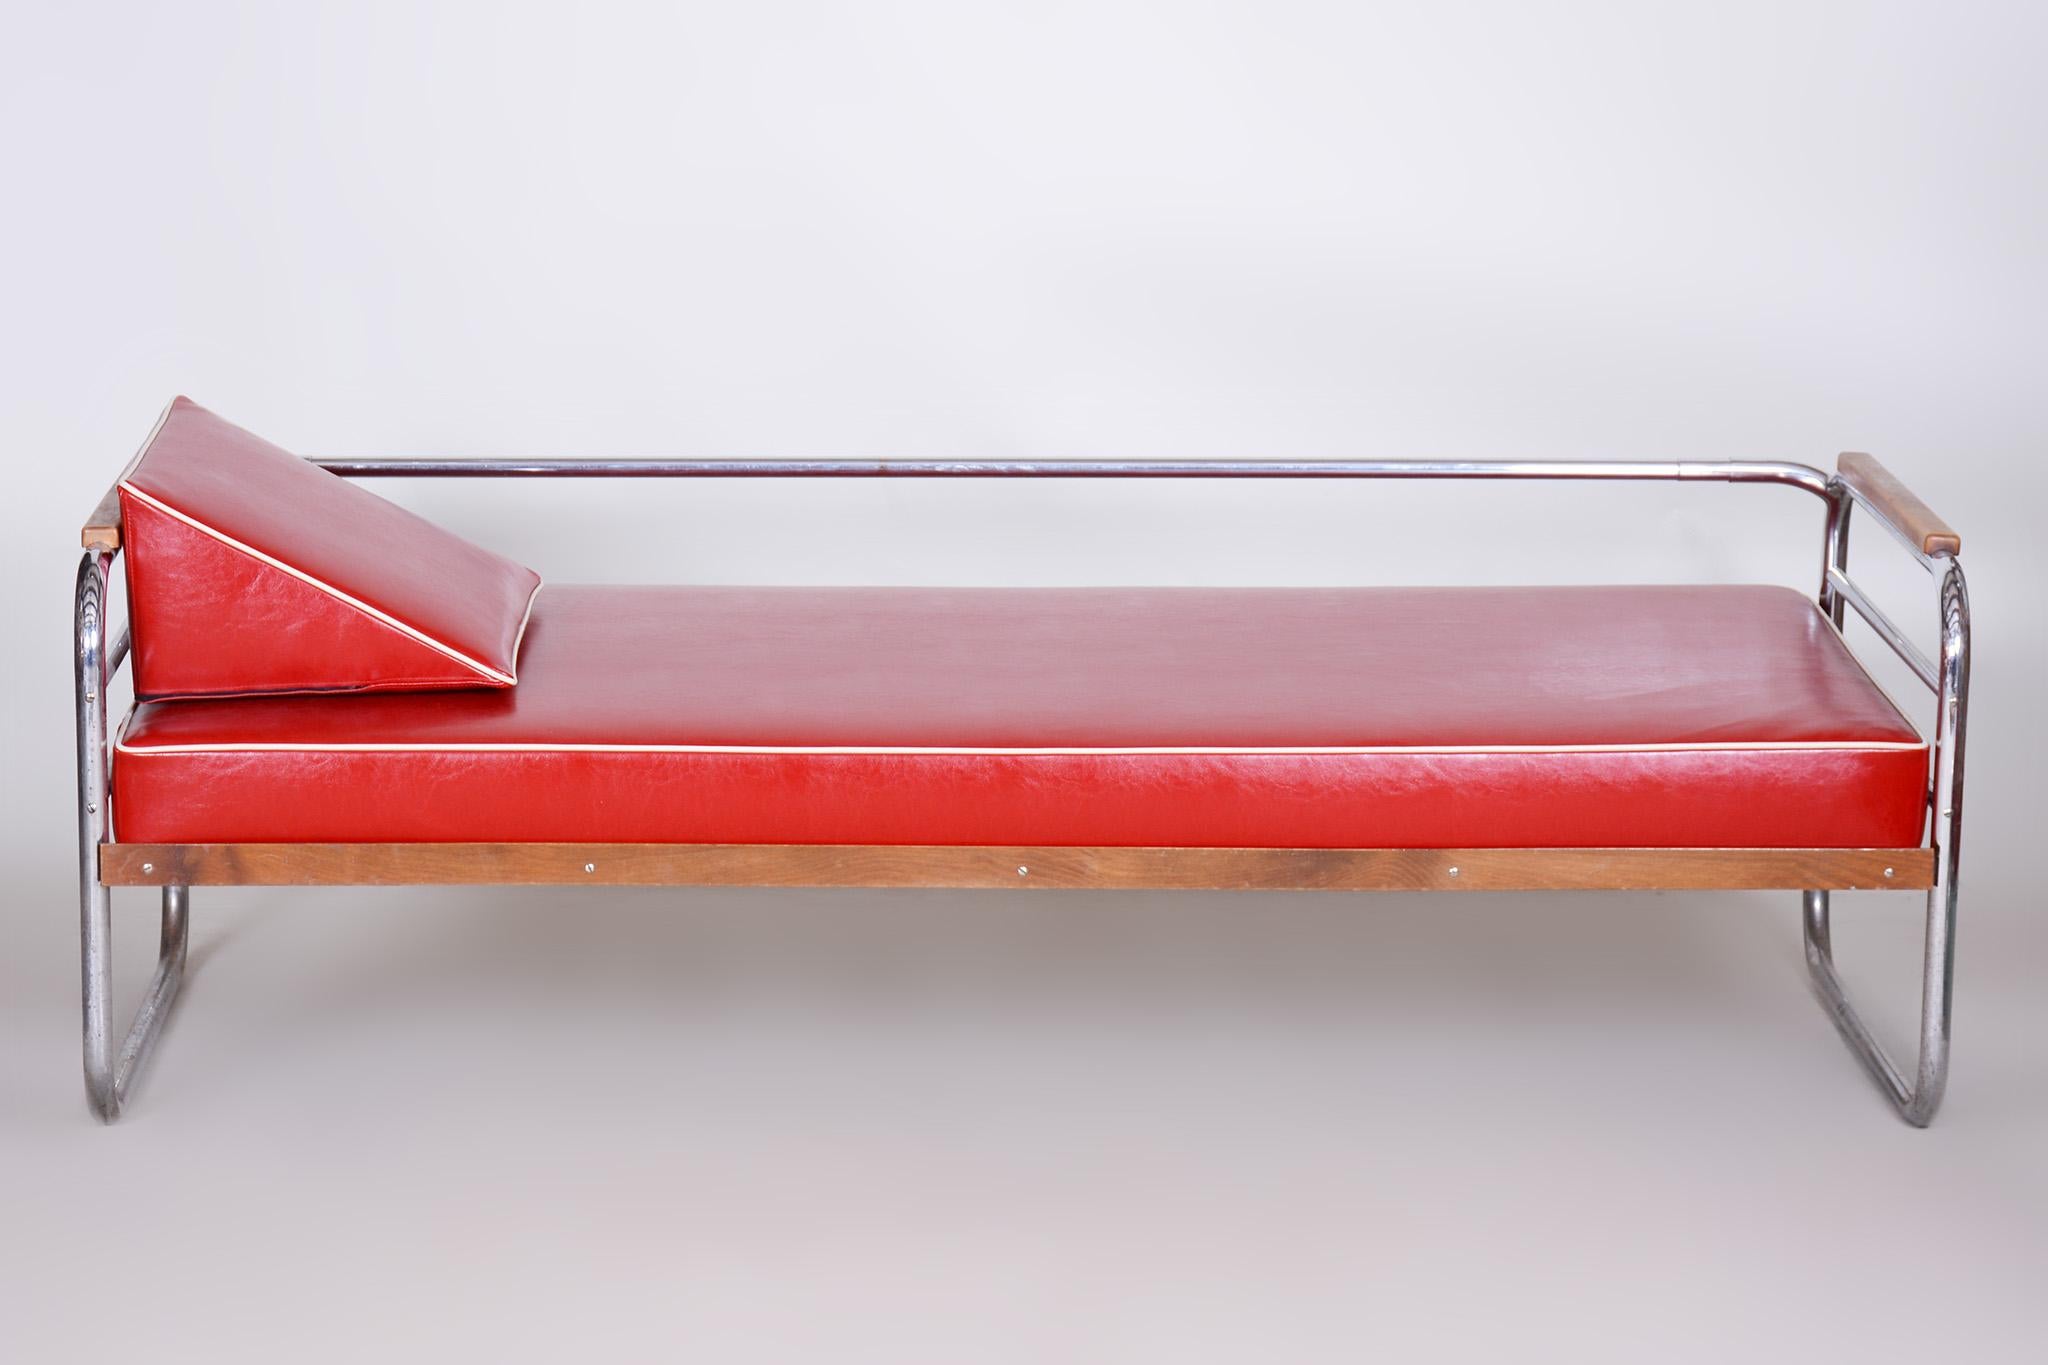 Czech Red High-Quality Leather Bauhaus Sofa by Thonet, Chrome, Fully Restored, 1930s For Sale